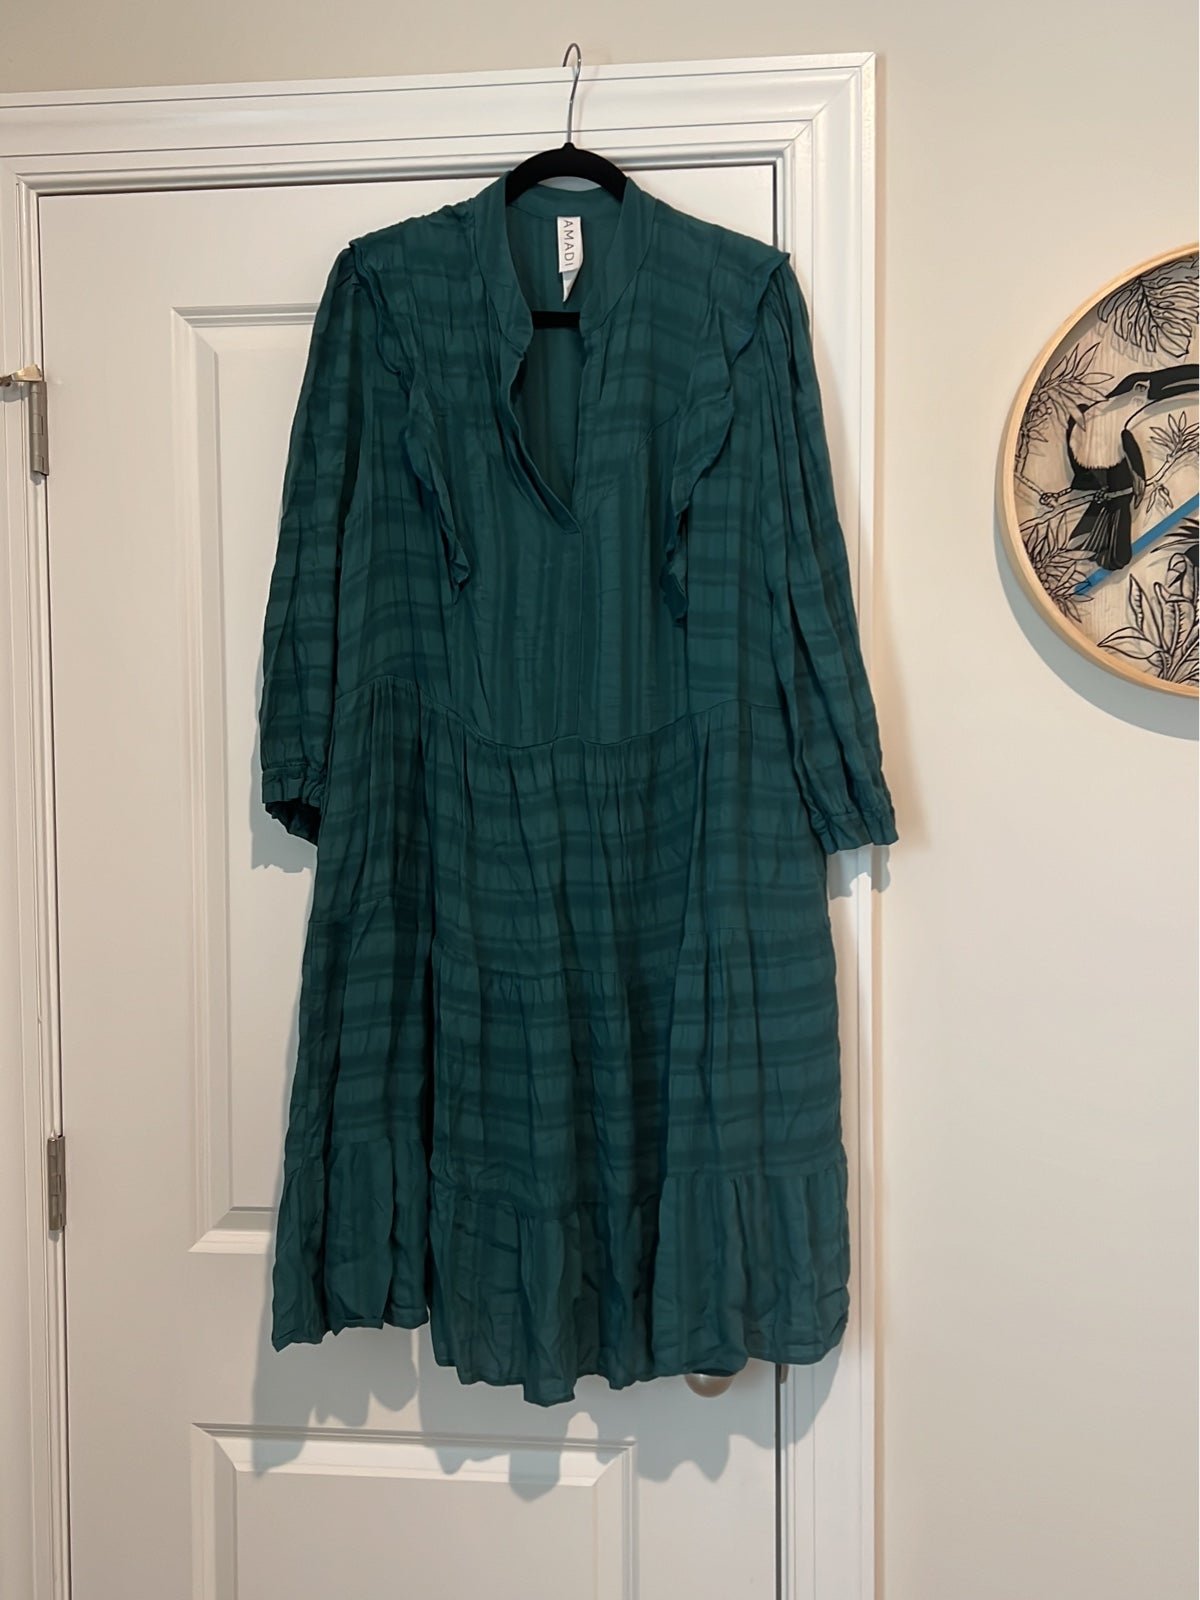 high discount Amadi tunic dress from Anthropologie hWT7OopCP on sale